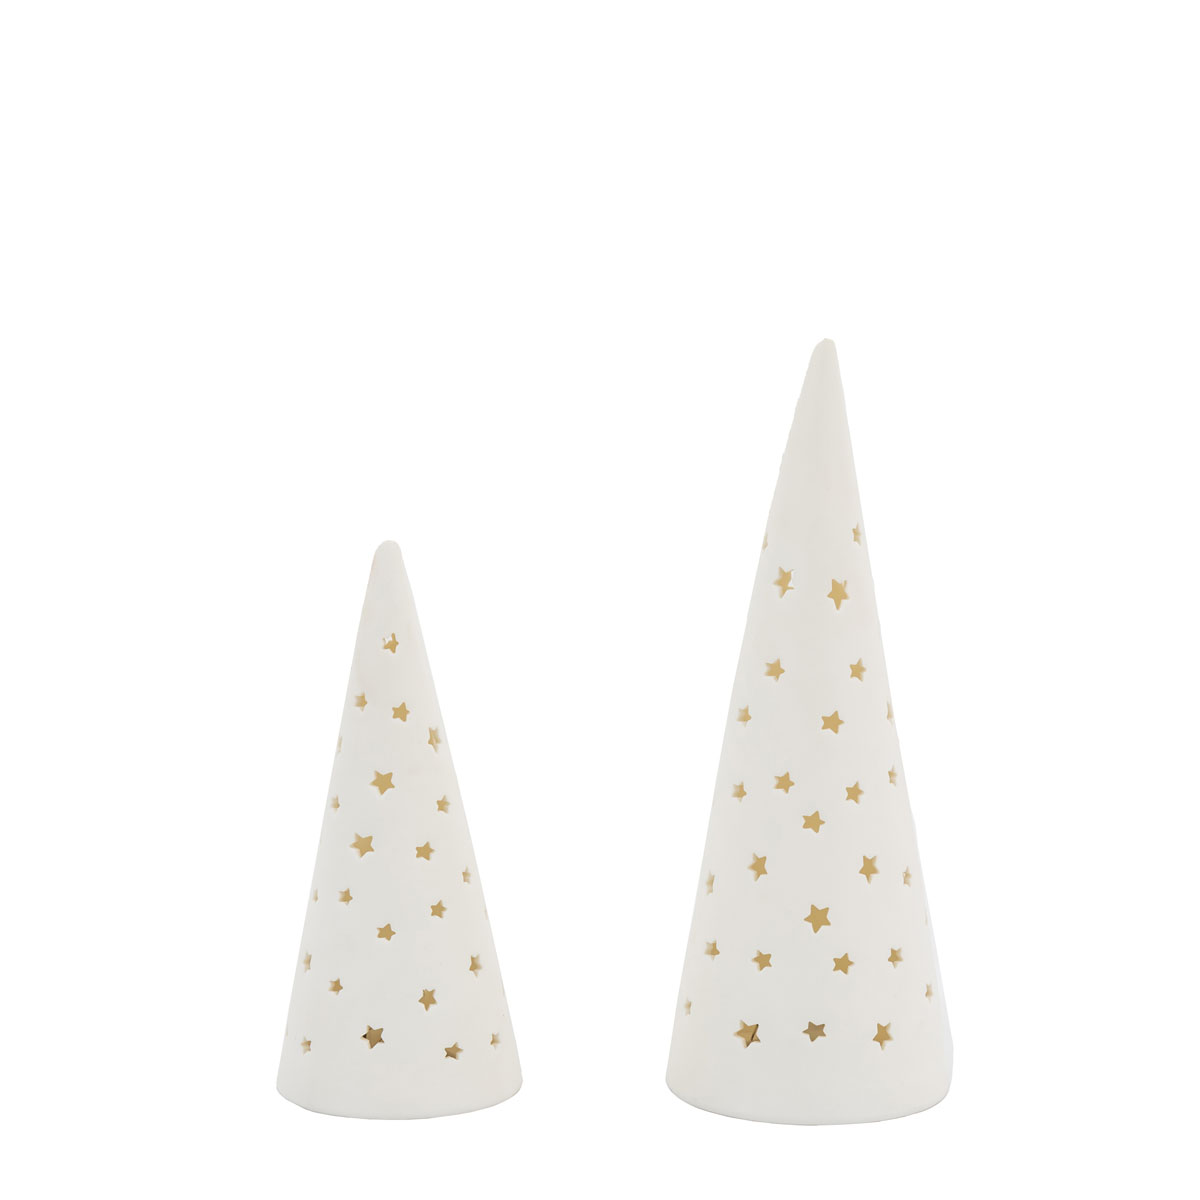 Twinkle Tree with LED White (Set of 2) 75x75x200mm